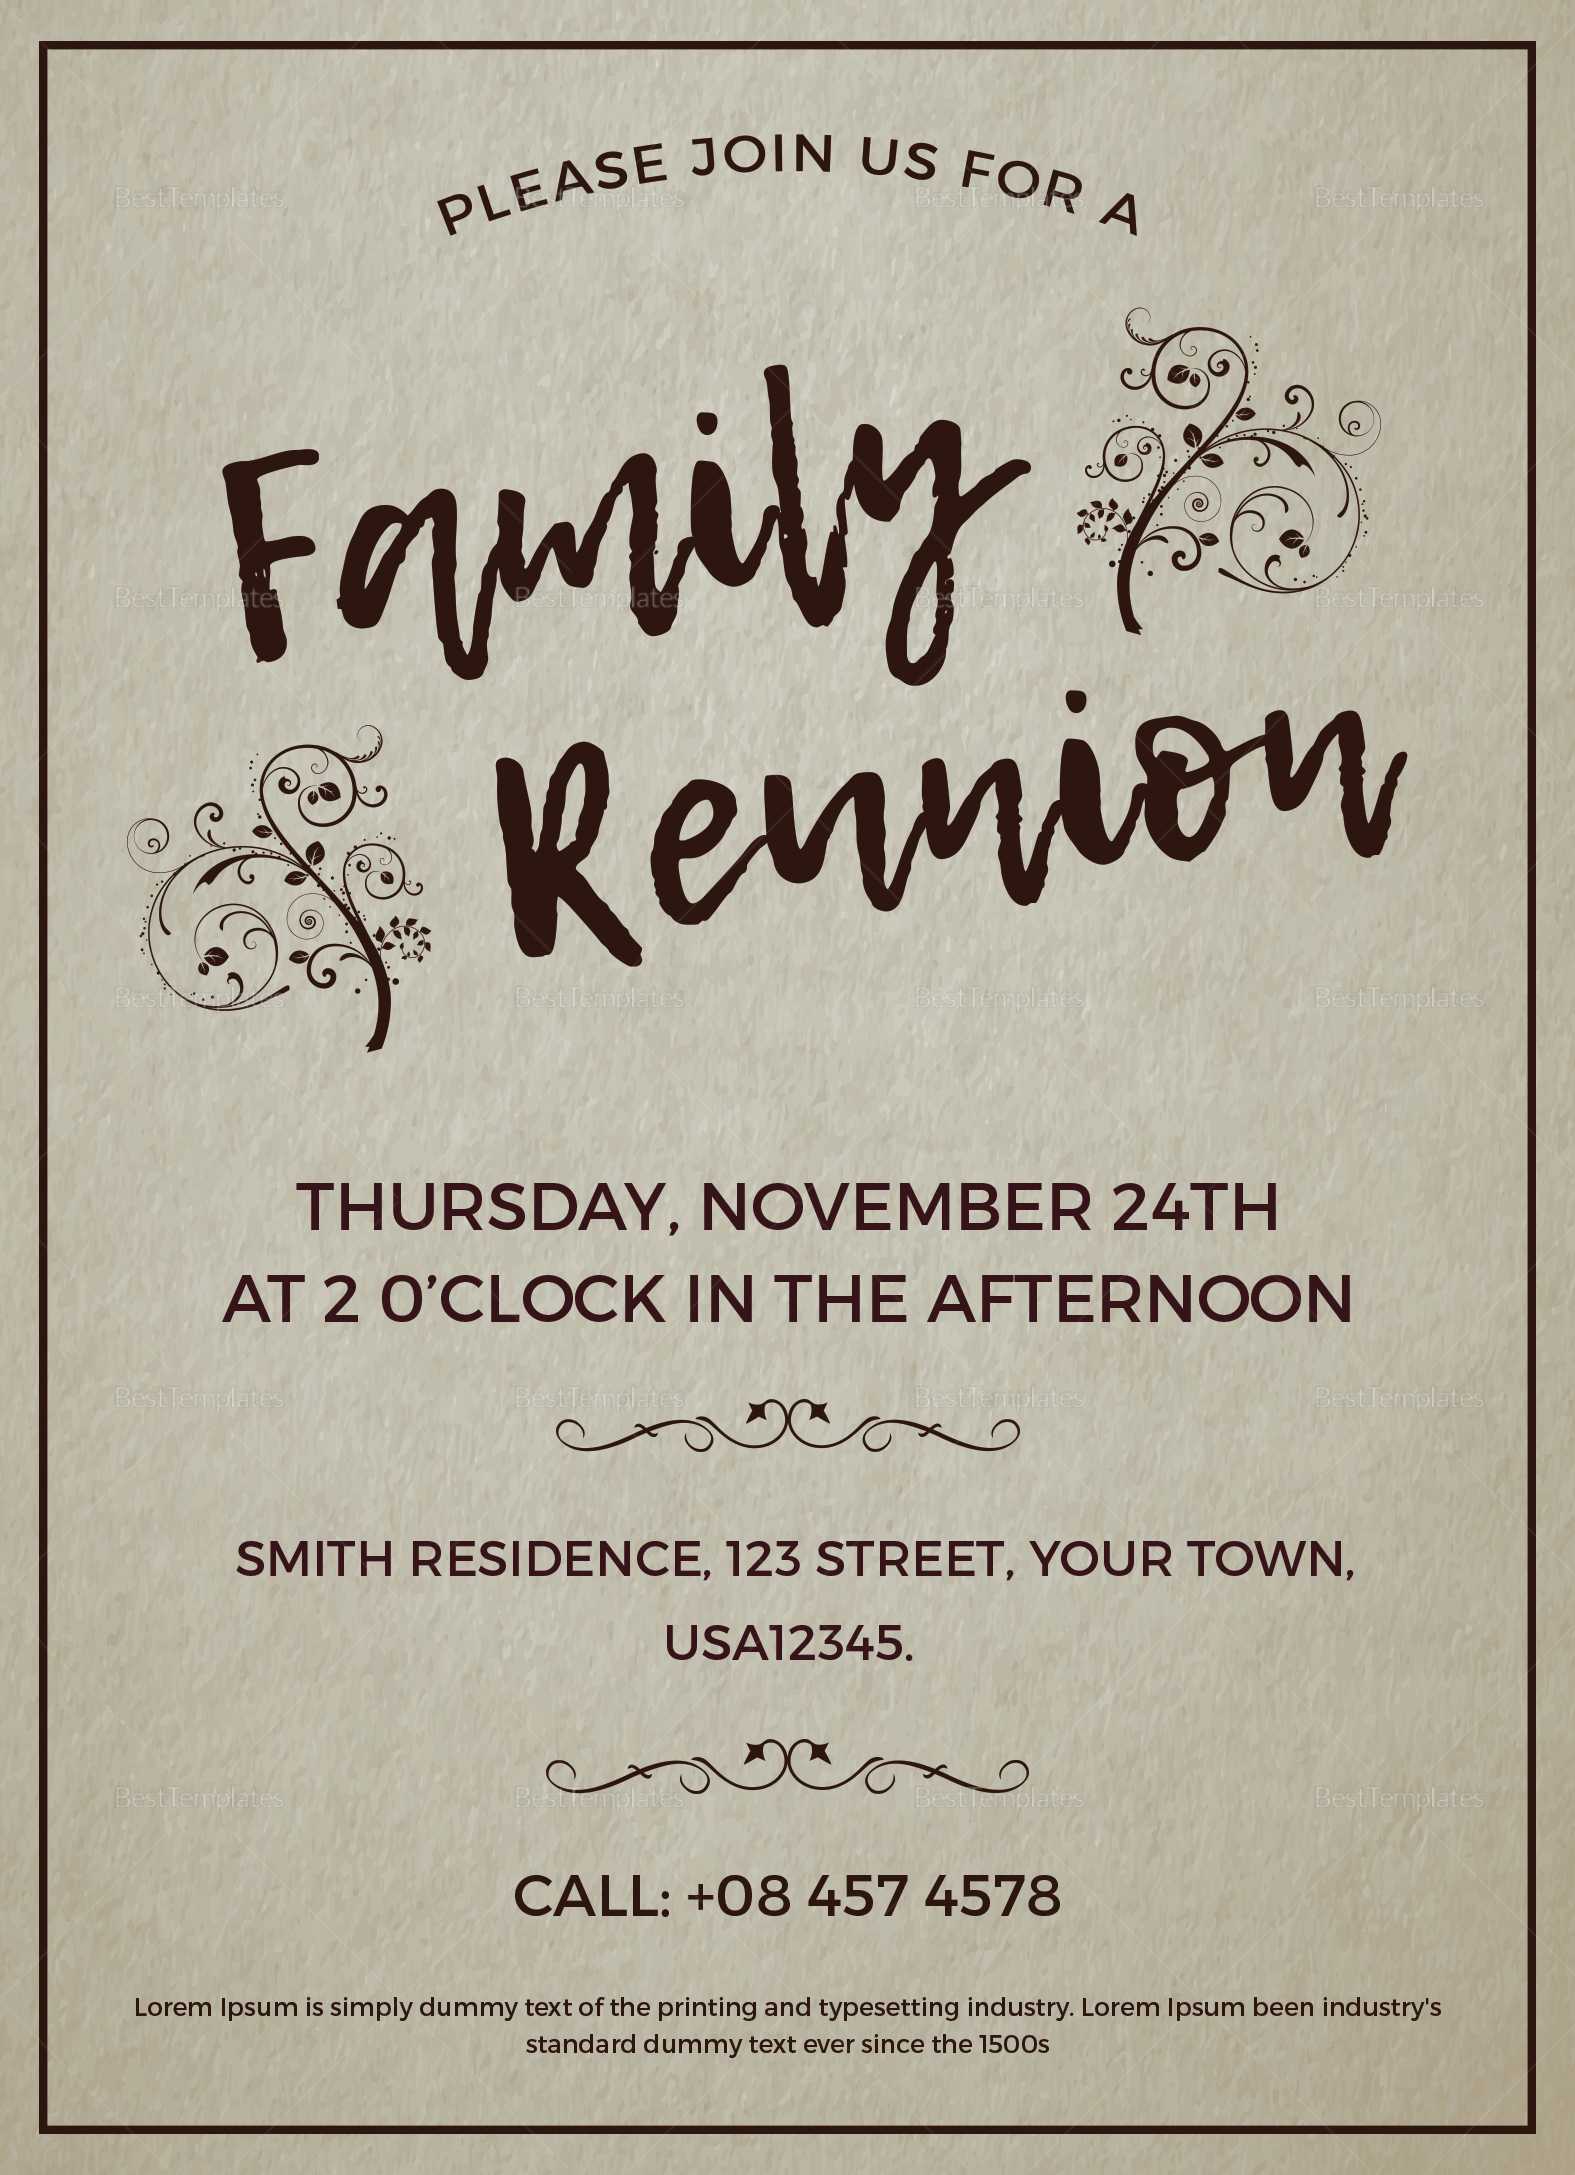 001 Coral State Family Reunion Invitation28229 Invitation Throughout Family Reunion Flyer Template